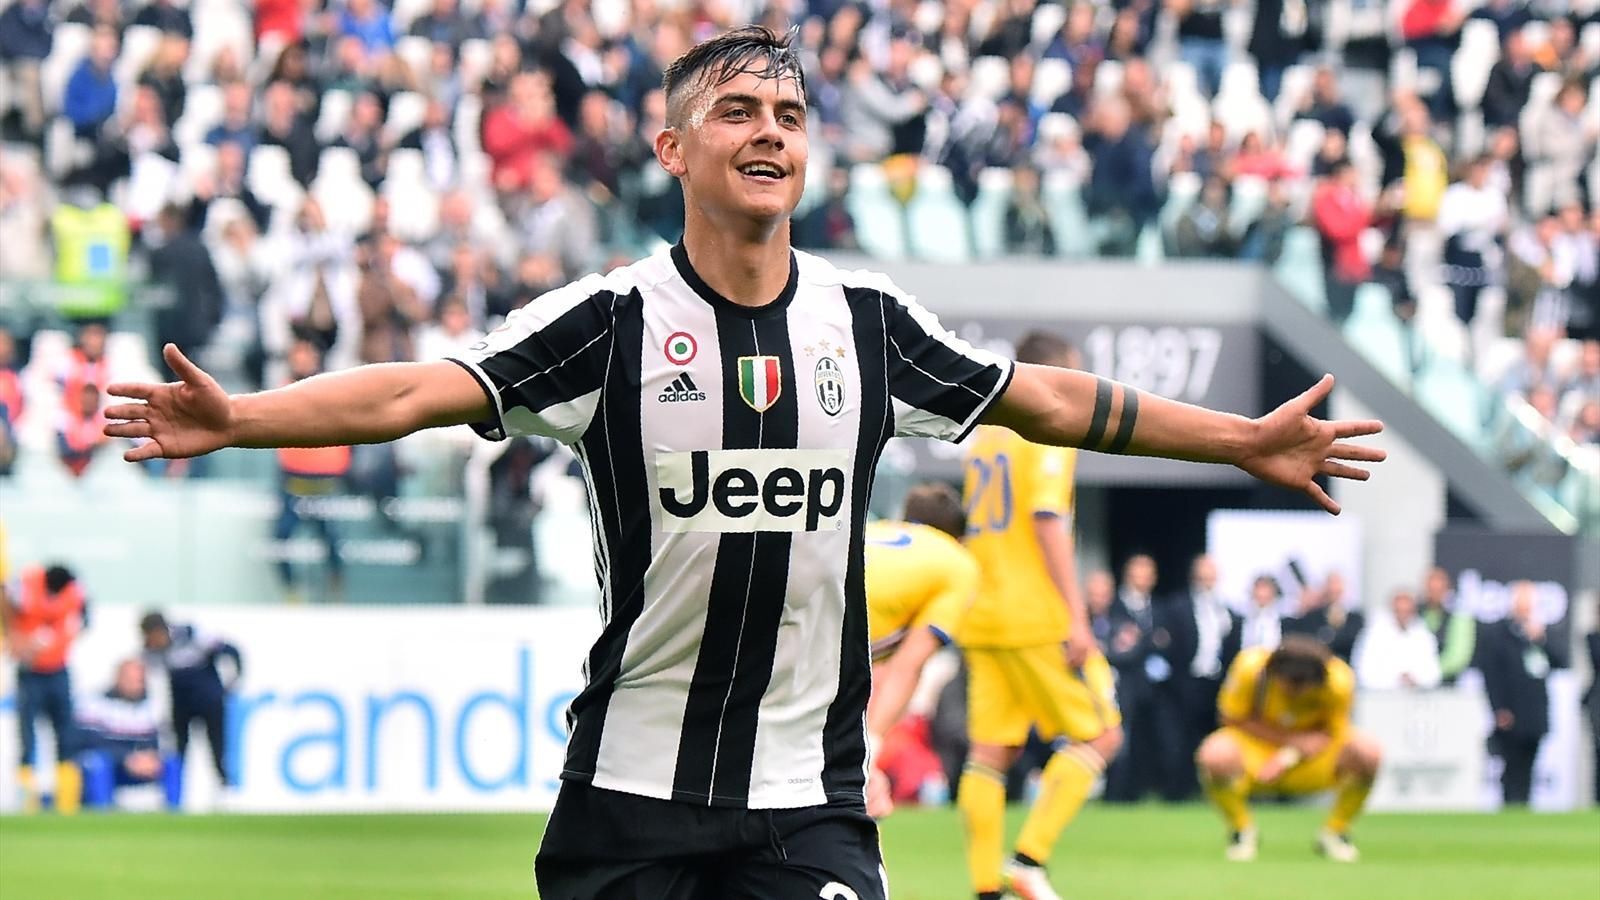 Juventus and Dybala Reach an Agreement to Extend His Contract?